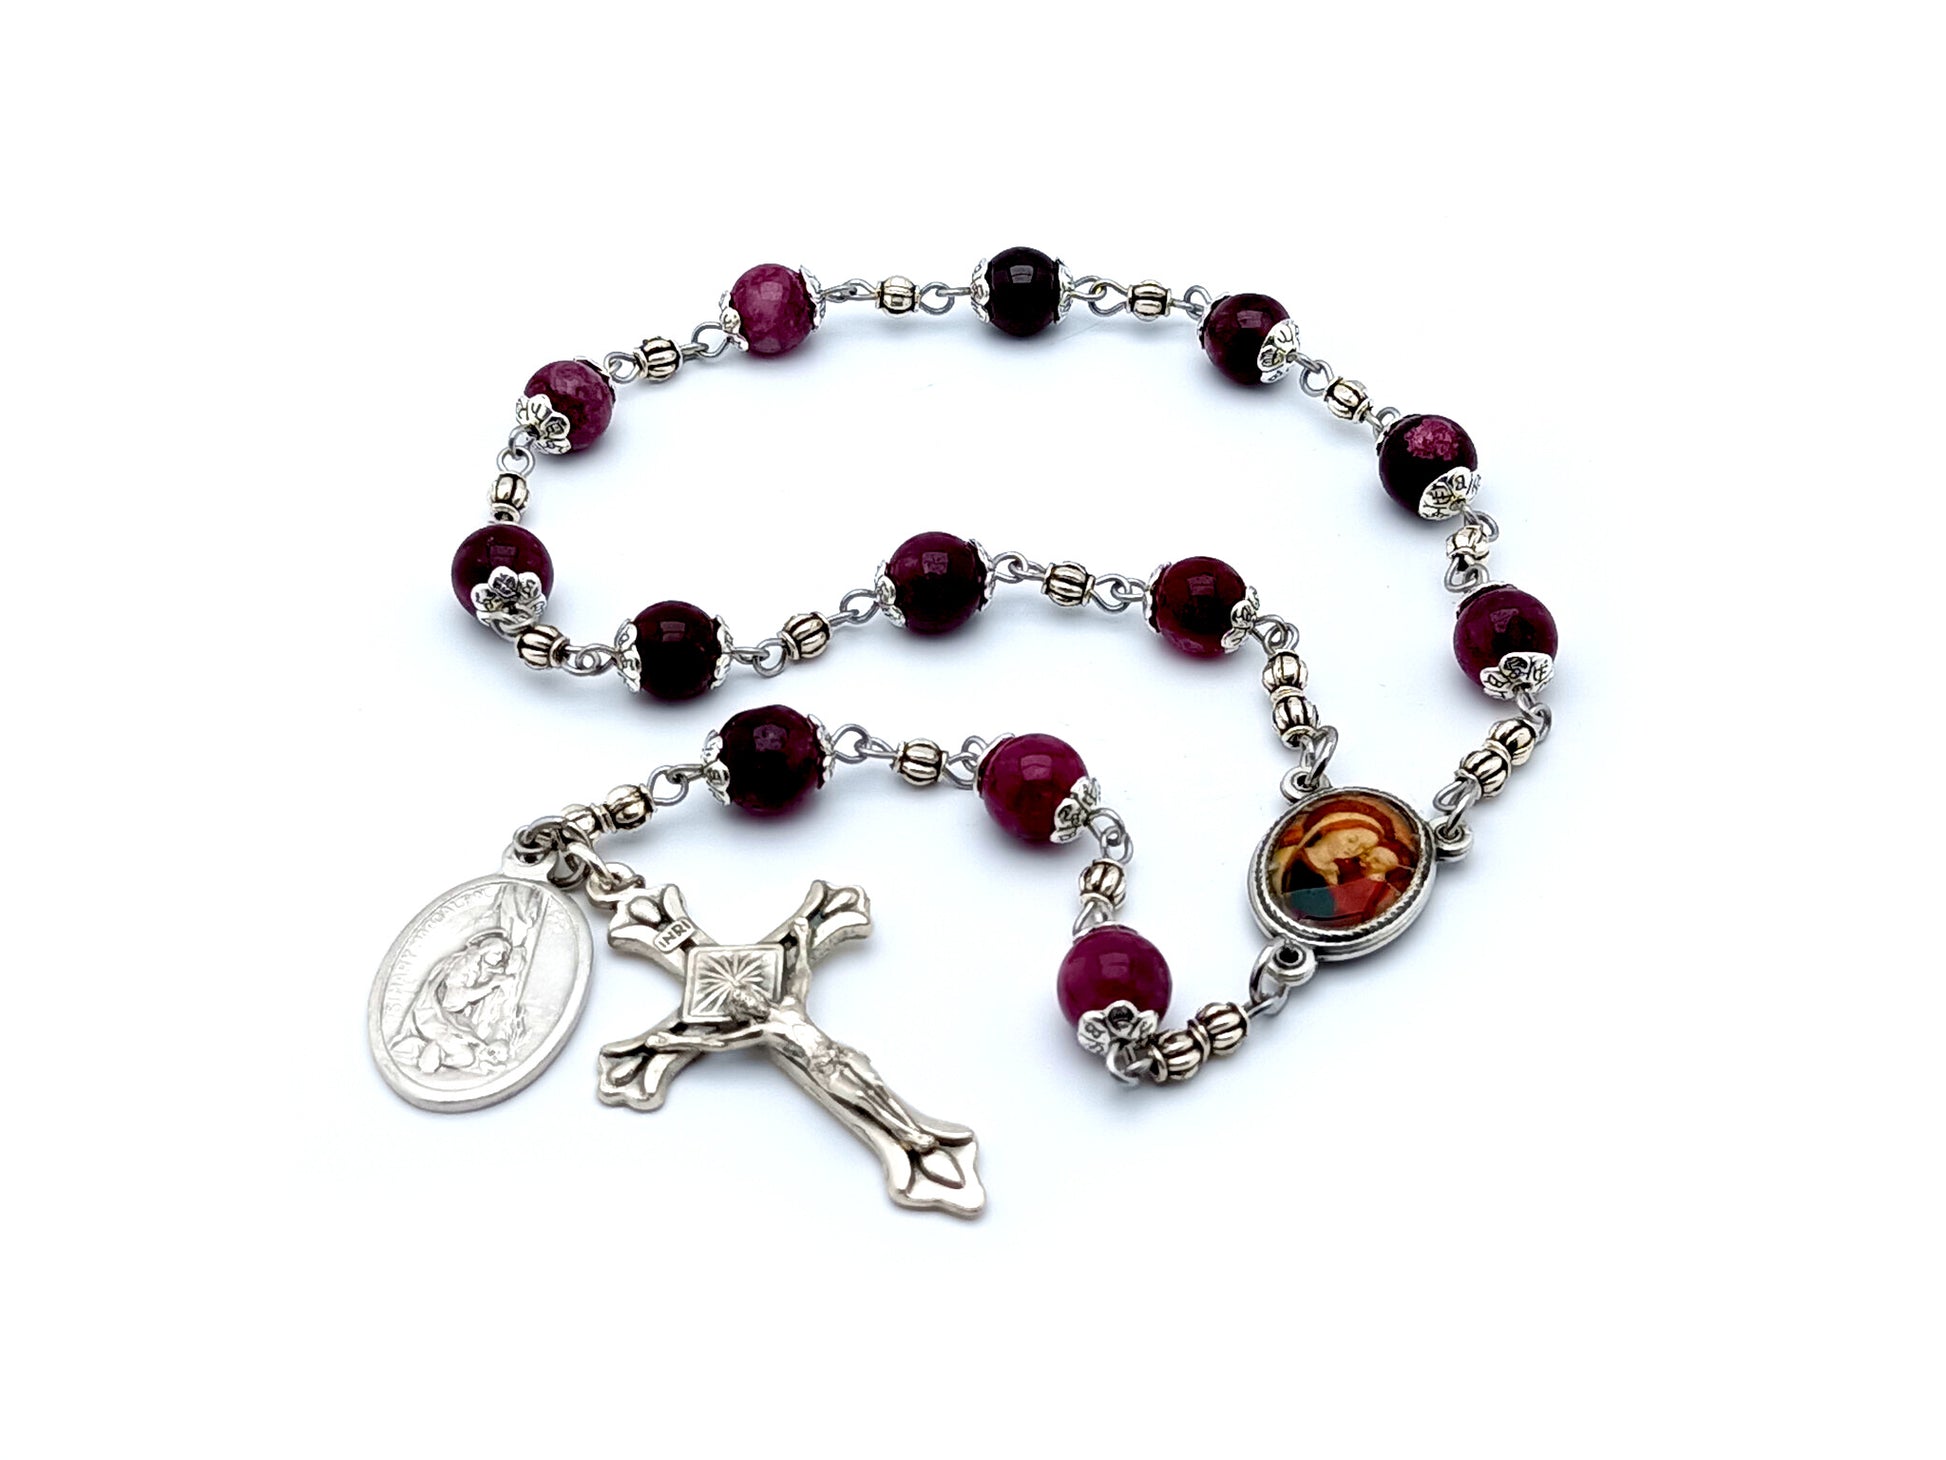 Saint Mary Magdalene unique rosary beads prayer chaplet with purple beads and silver alloy crucifix.